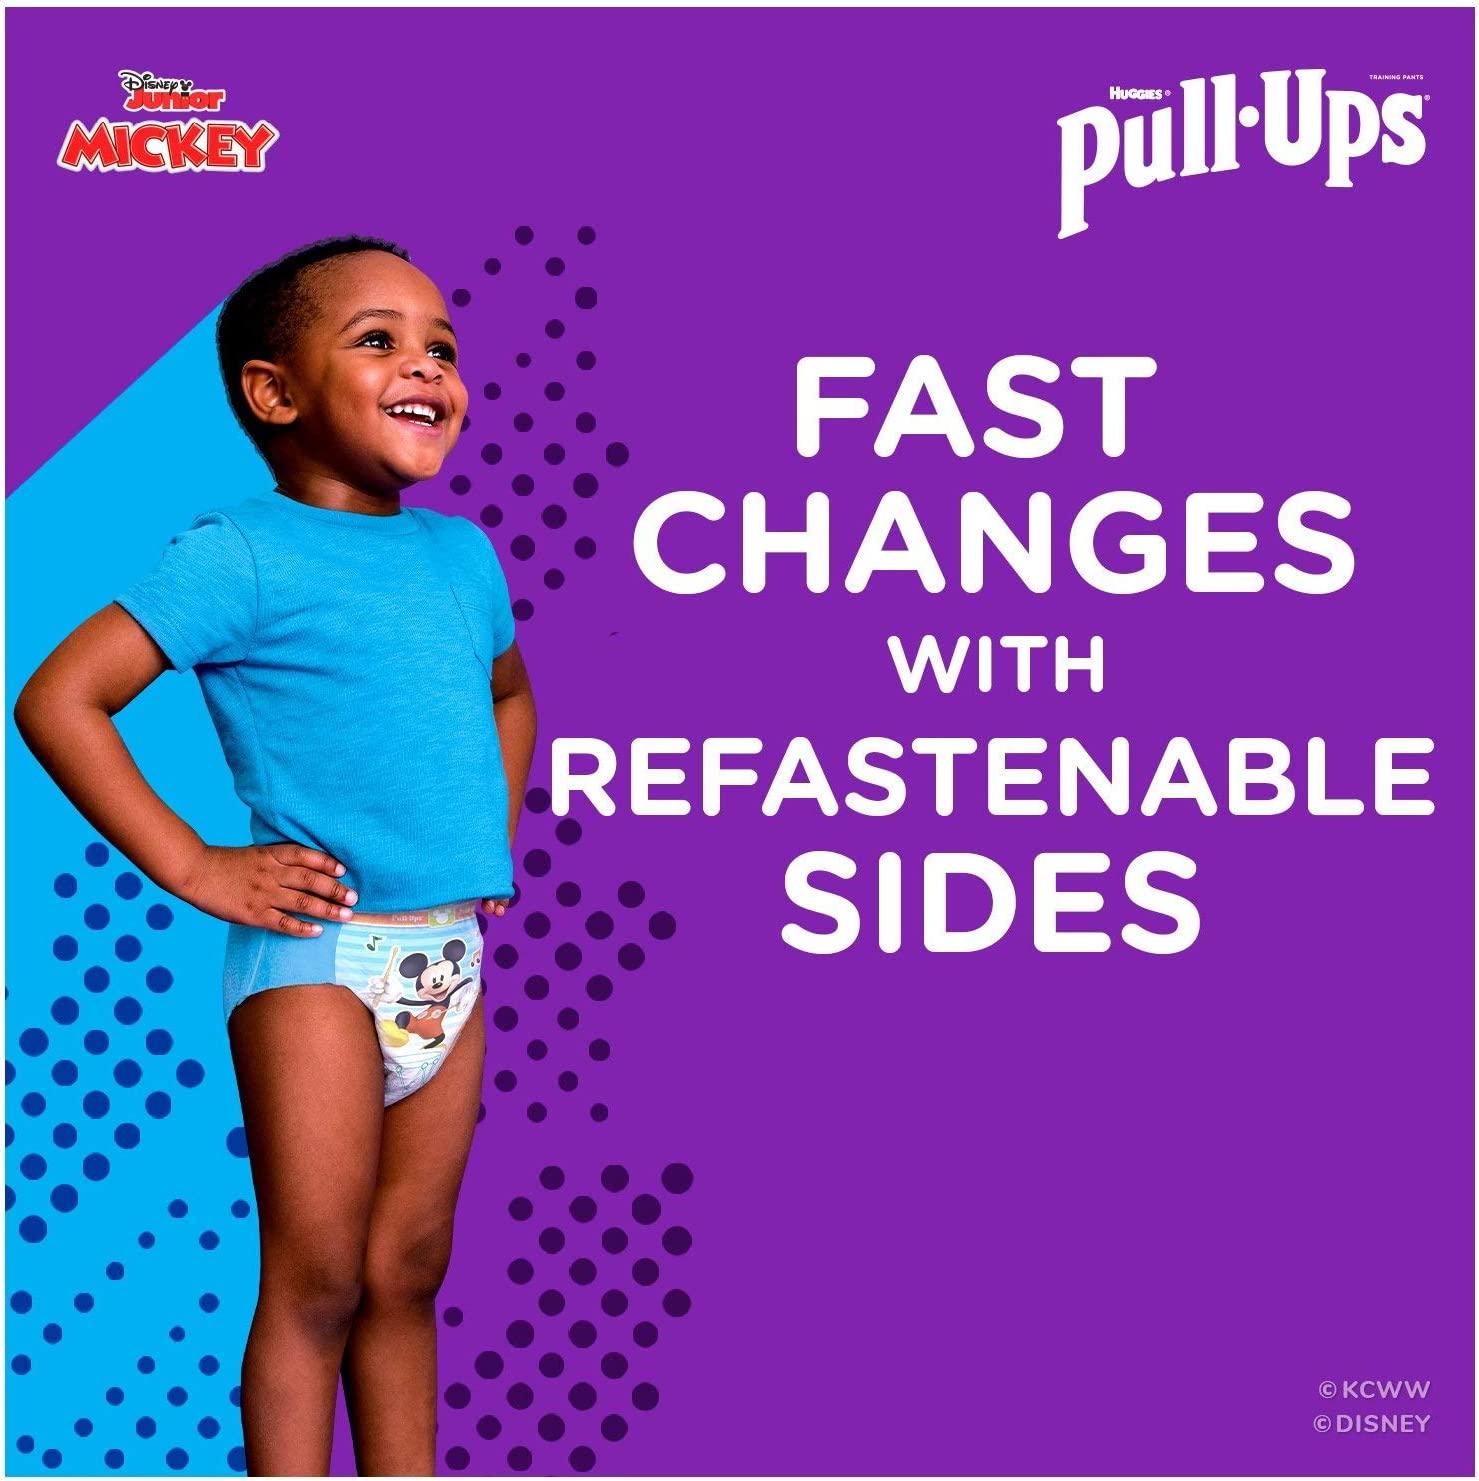  Pull-Ups Learning Designs for Girls Potty Training Pants, 3T-4T  (32-40 lbs.), 22 Ct. (Packaging May Vary) : Baby